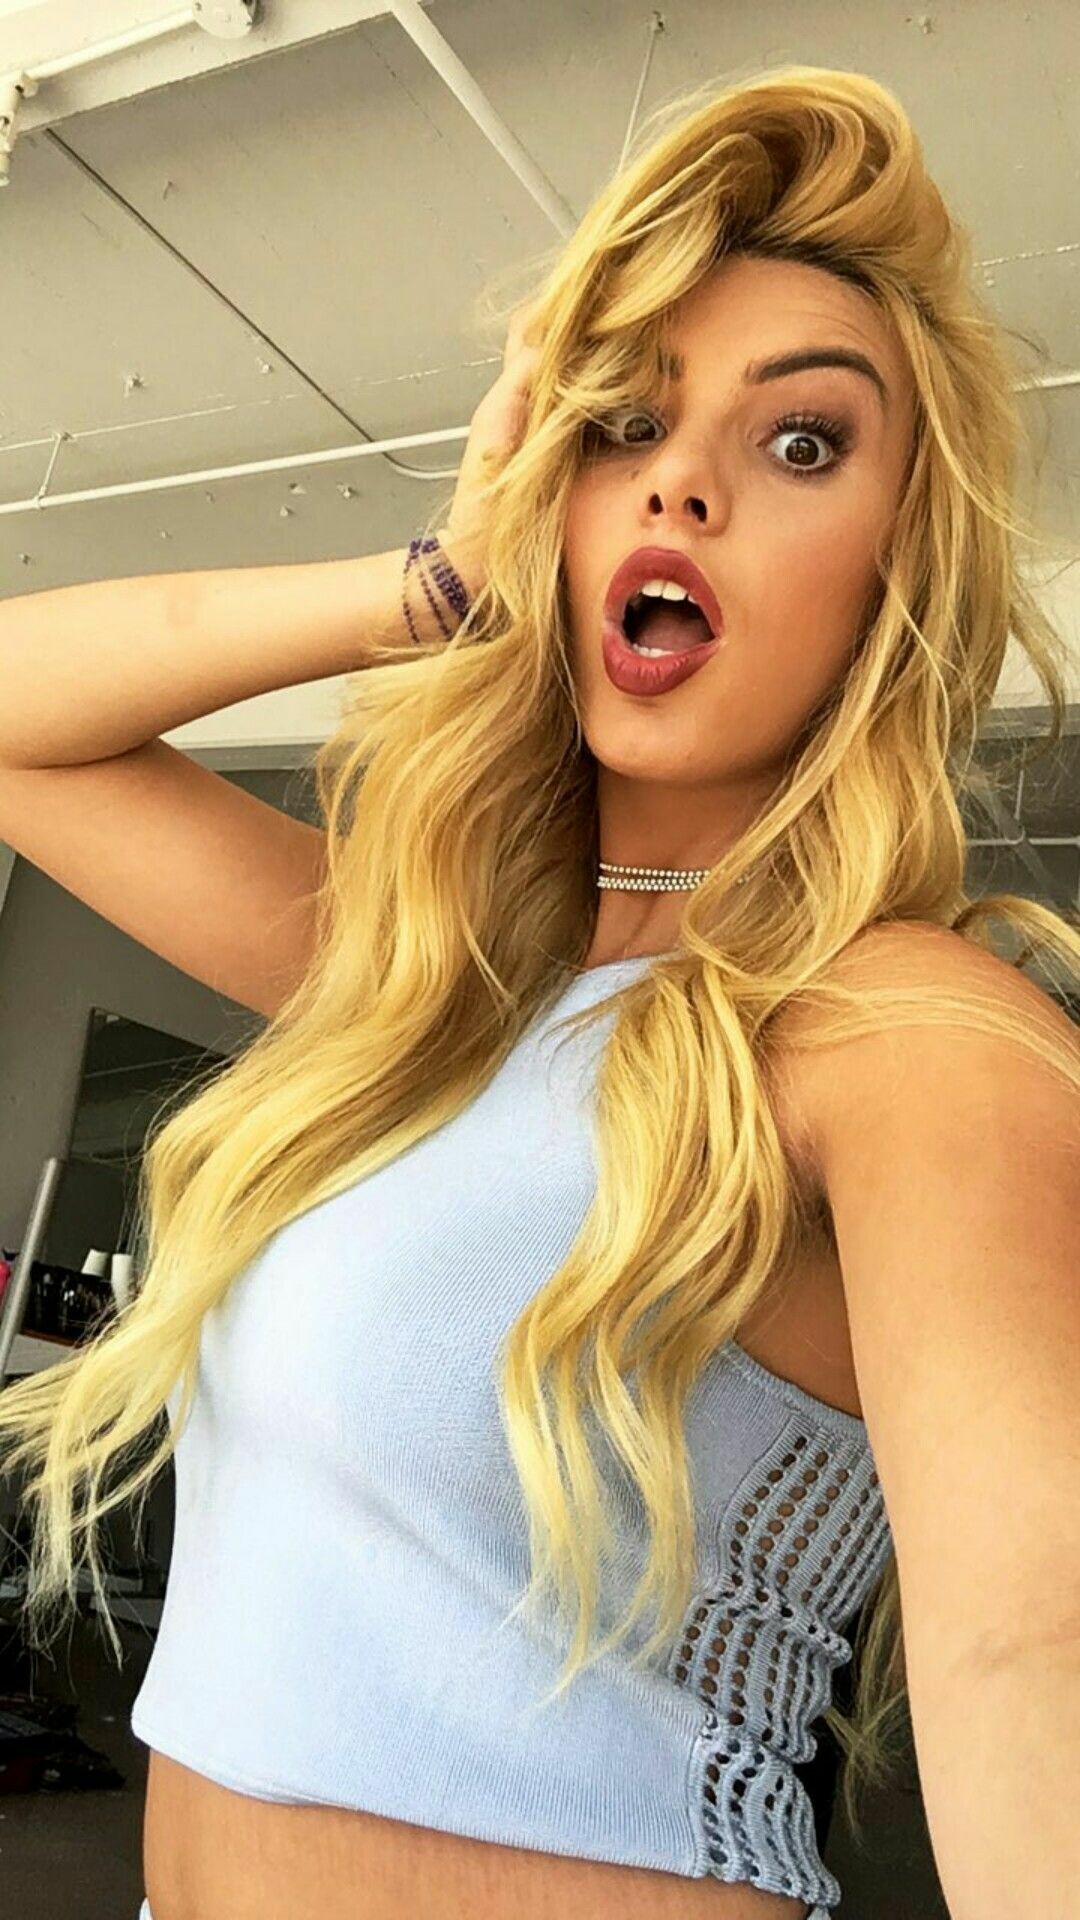 Lele Pons: Was a guest speaker at the 2020 CES conference held in Las Vegas. 1080x1920 Full HD Wallpaper.